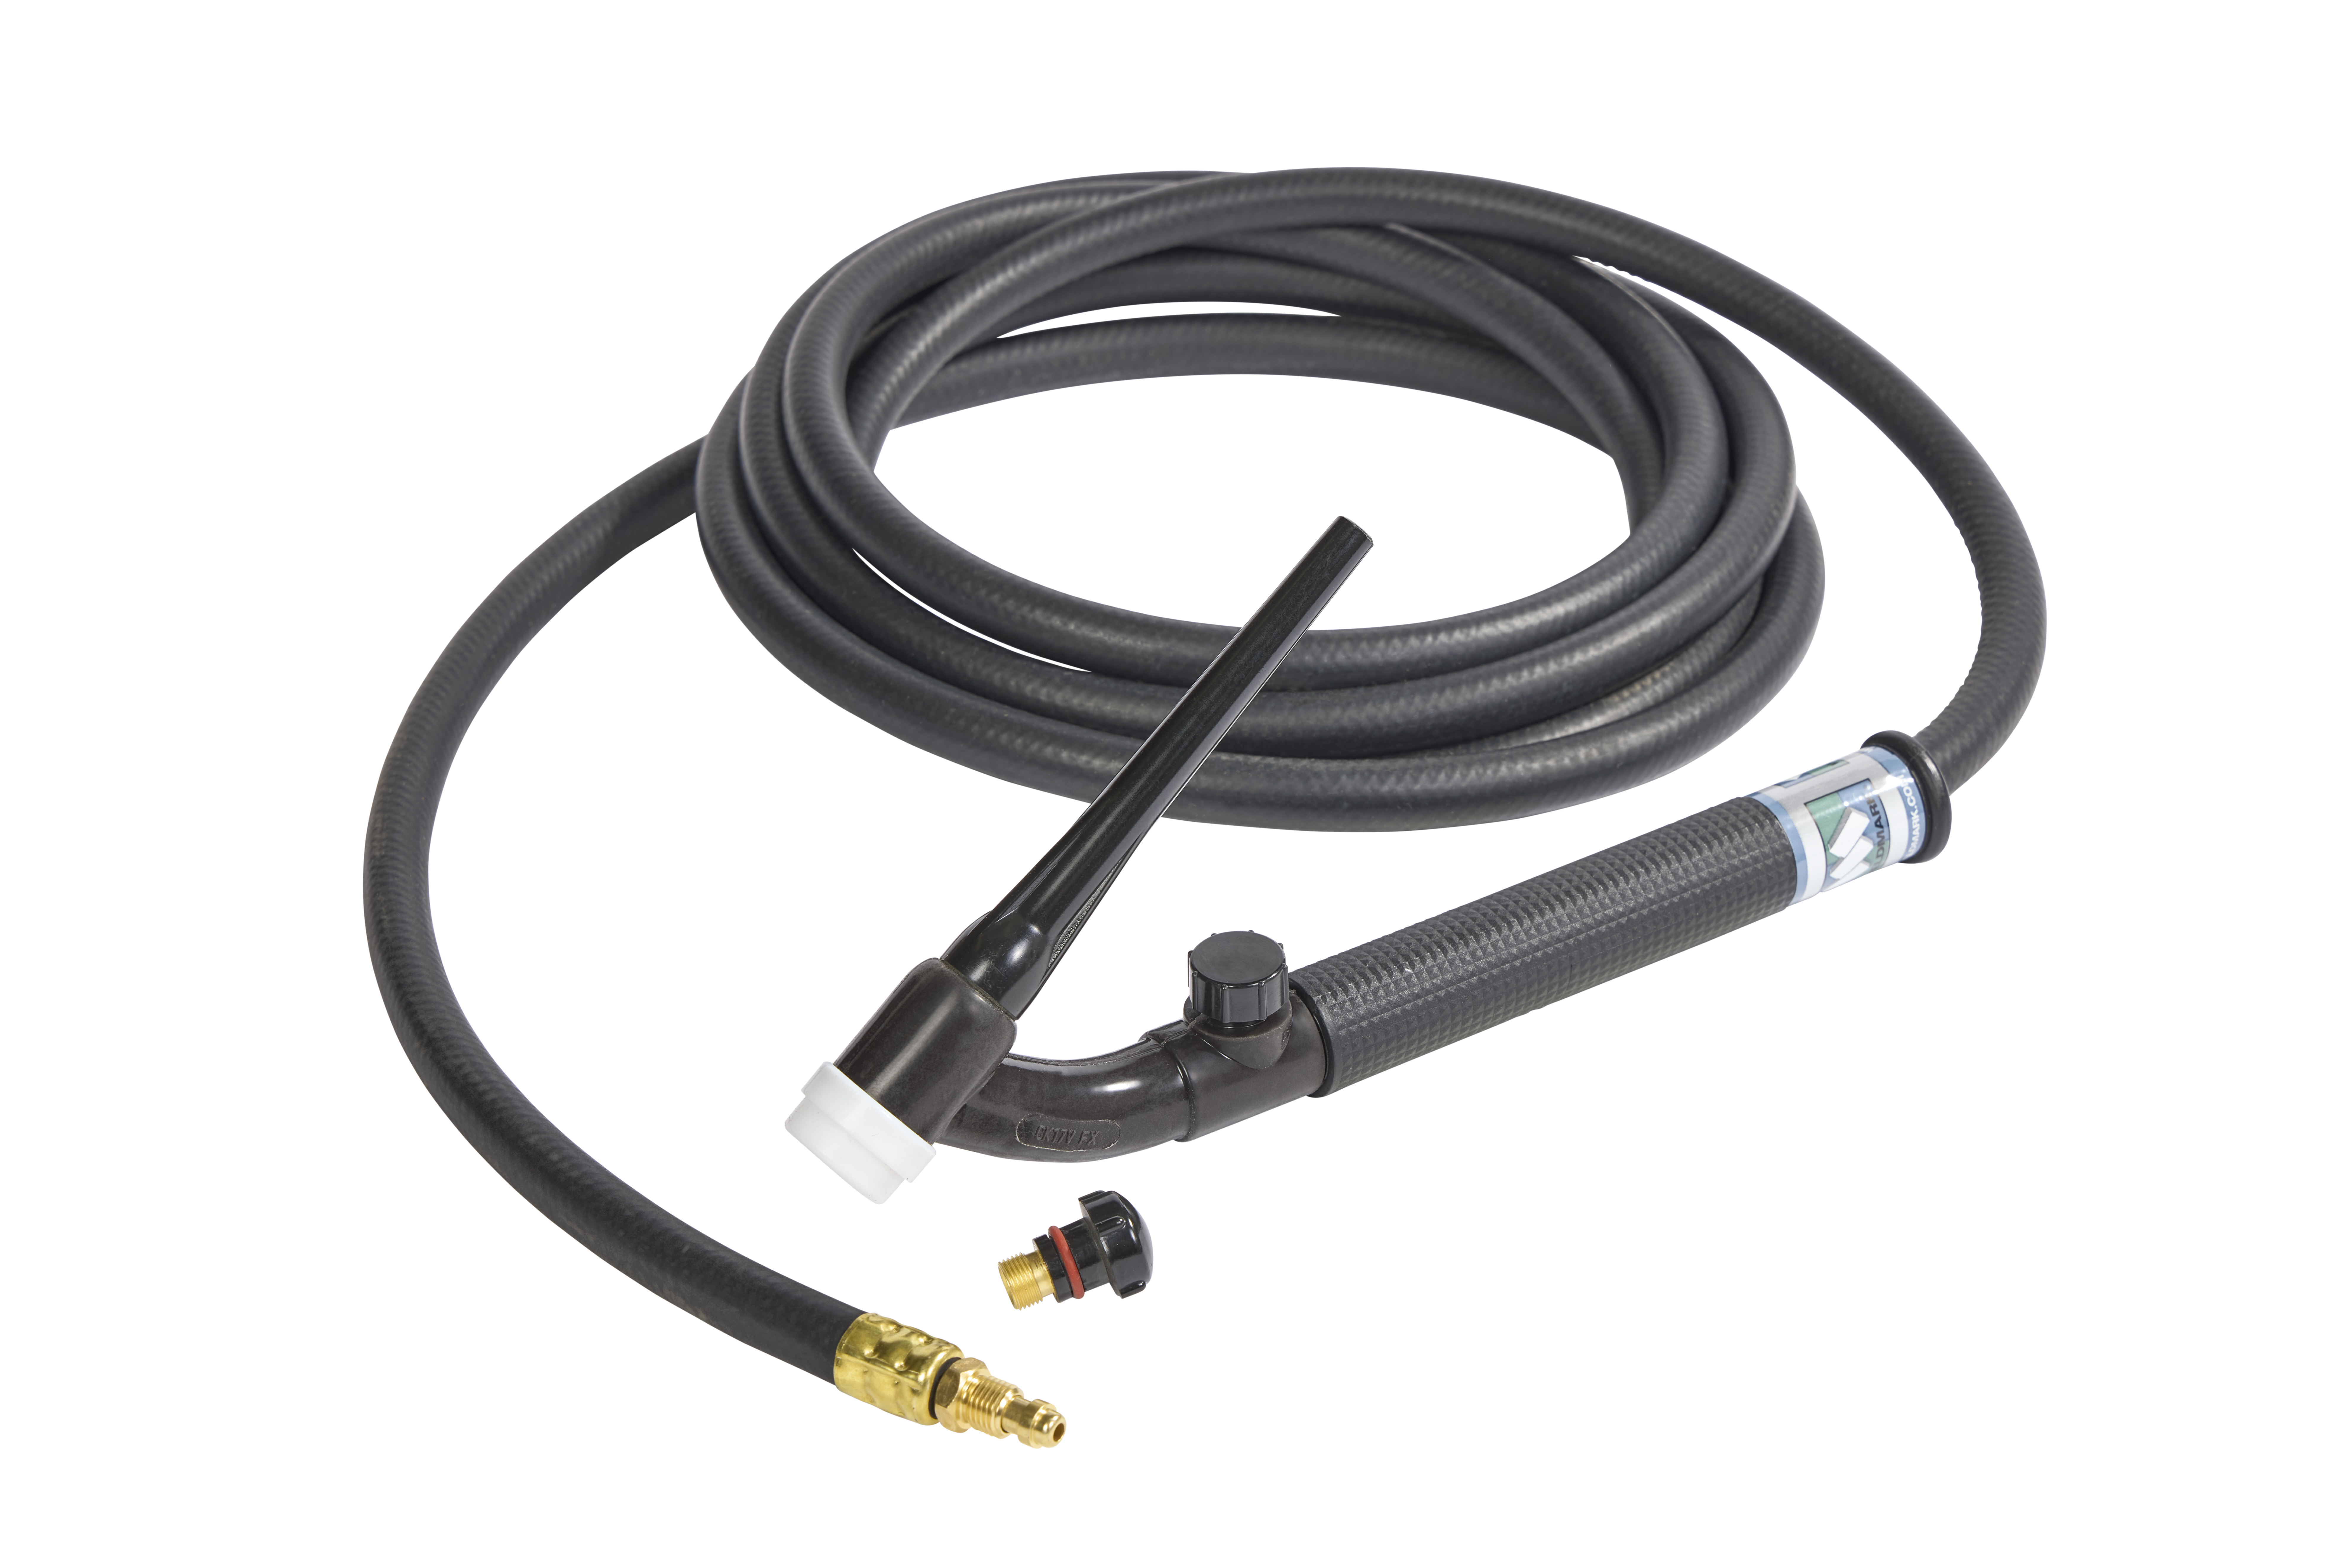 Weldmark by CK Linde style TIG Torch Pkg 17 Series Air cooled. 12.5ft. 150 amp